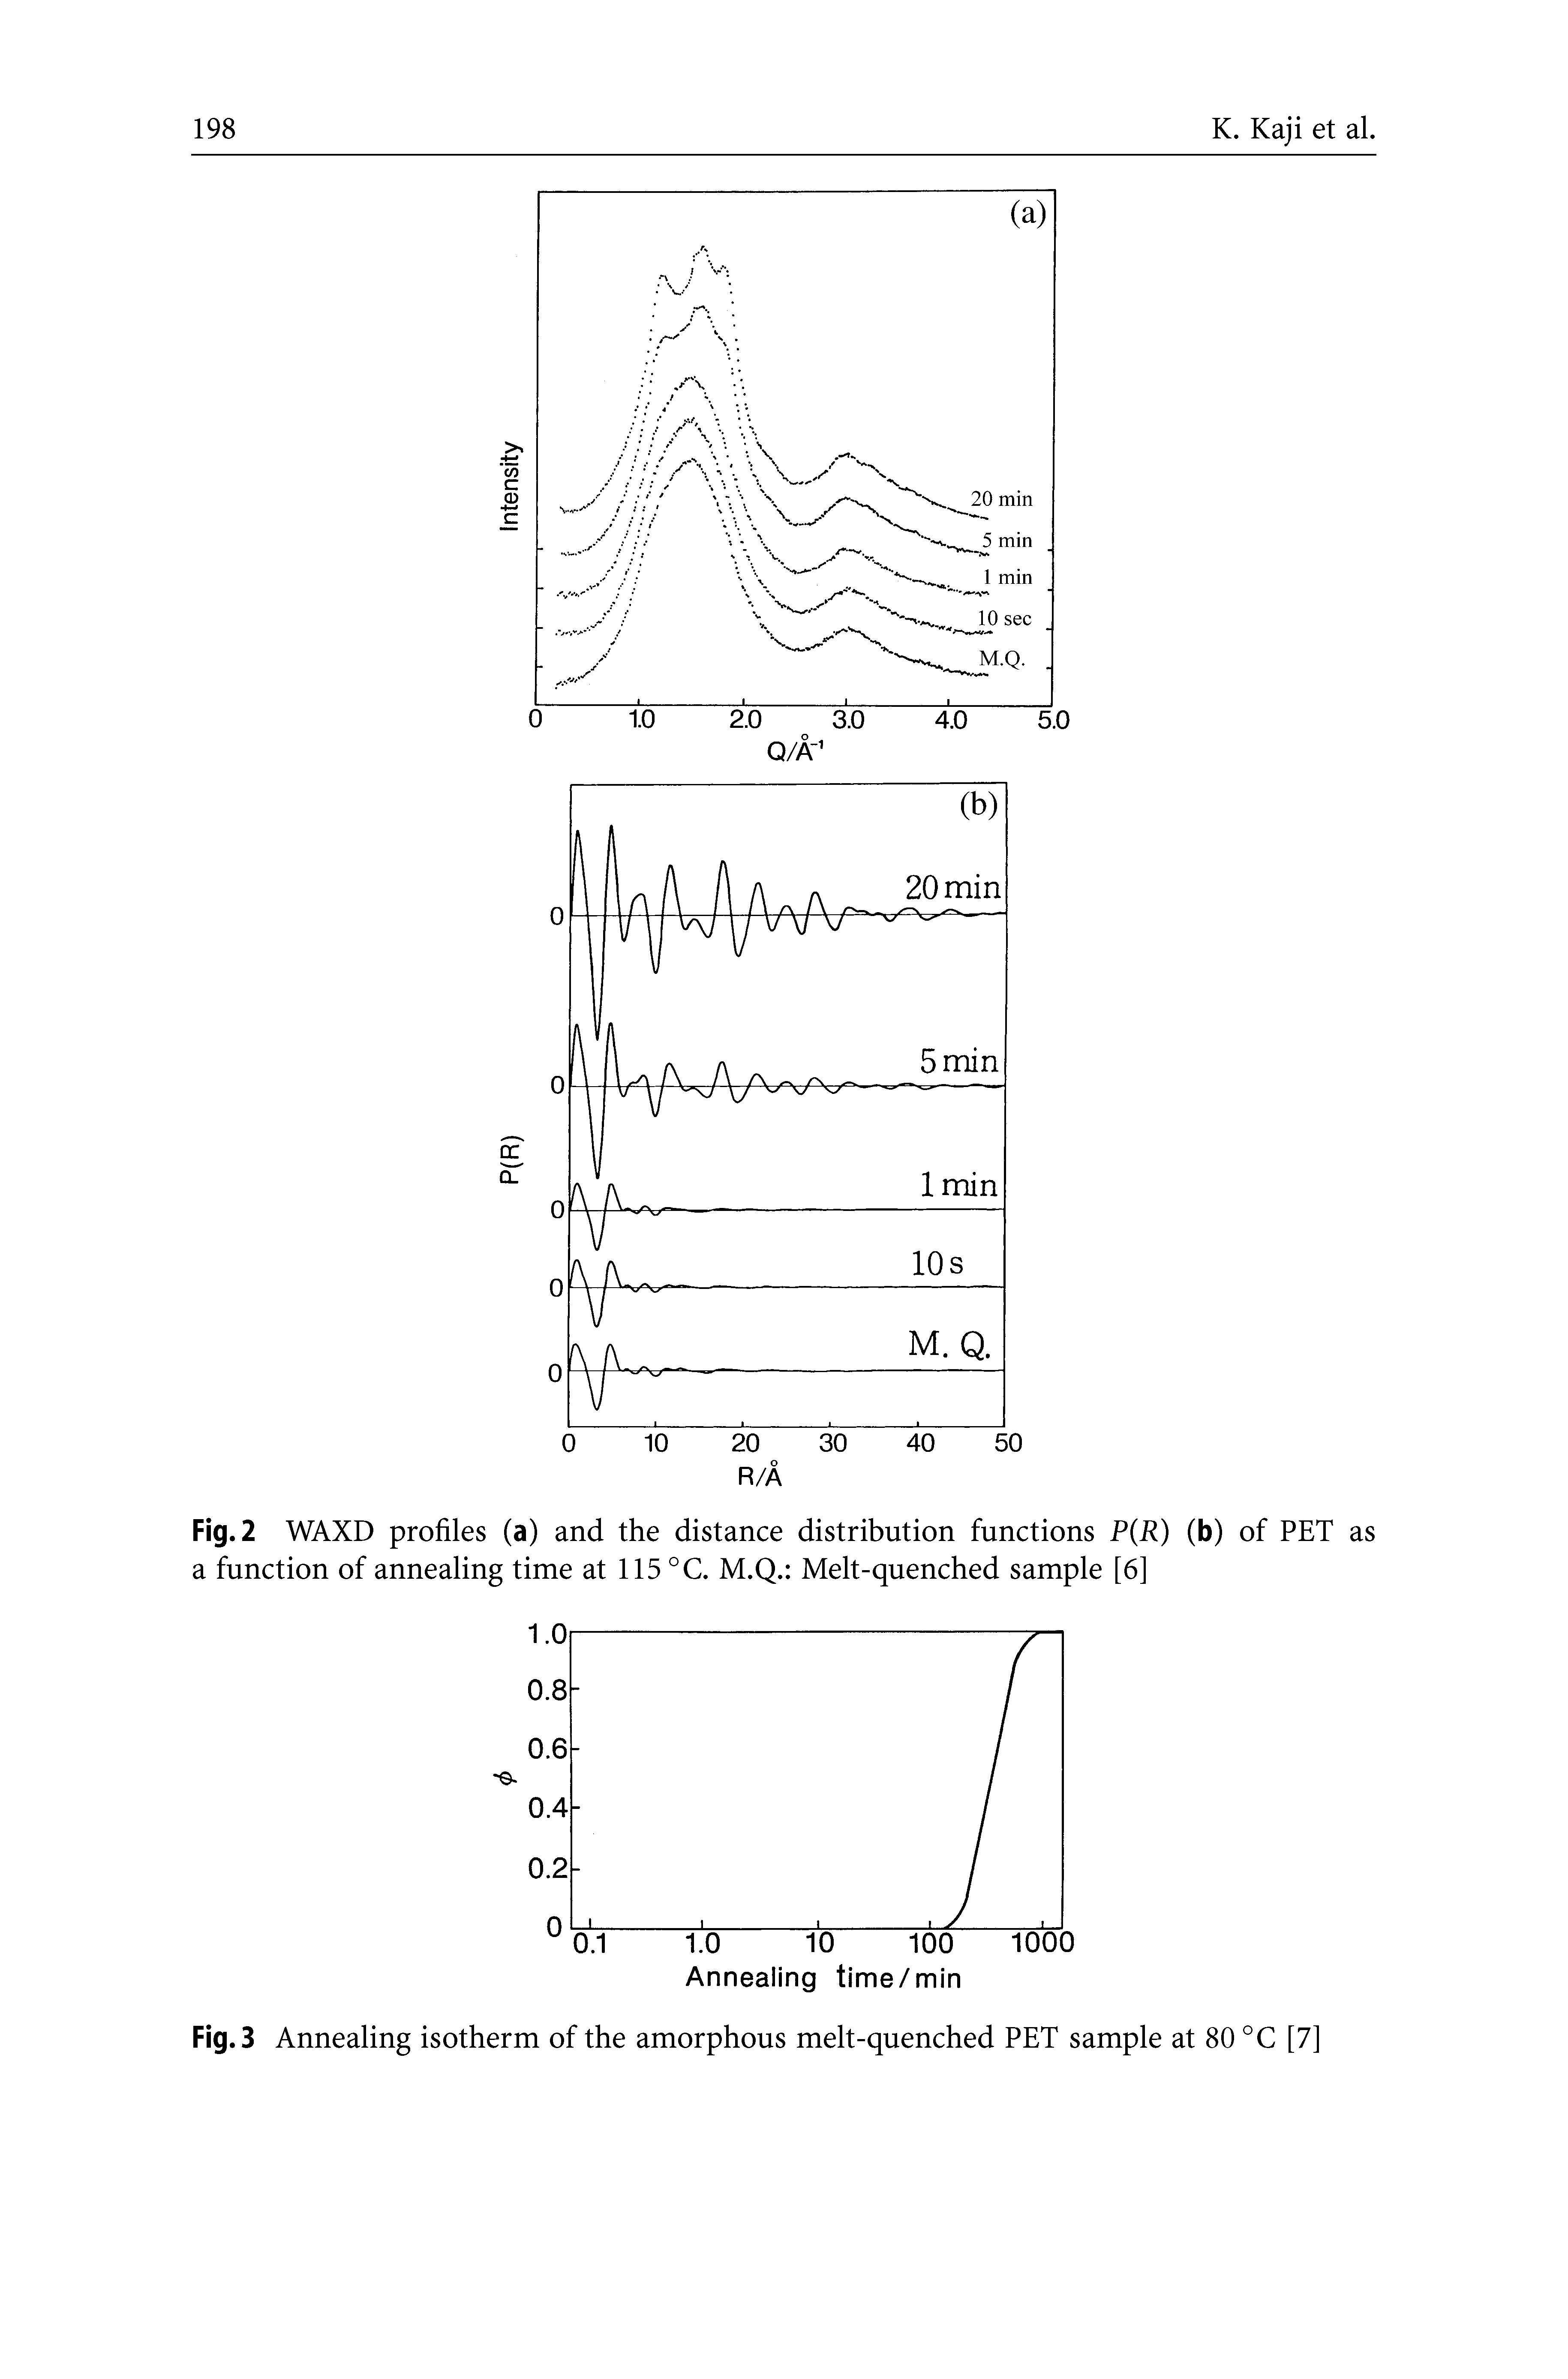 Fig. 2 WAXD profiles (a) and the distance distribution functions P(R) (b) of PET as a function of annealing time at 115 °C. M.Q. Melt-quenched sample [6]...